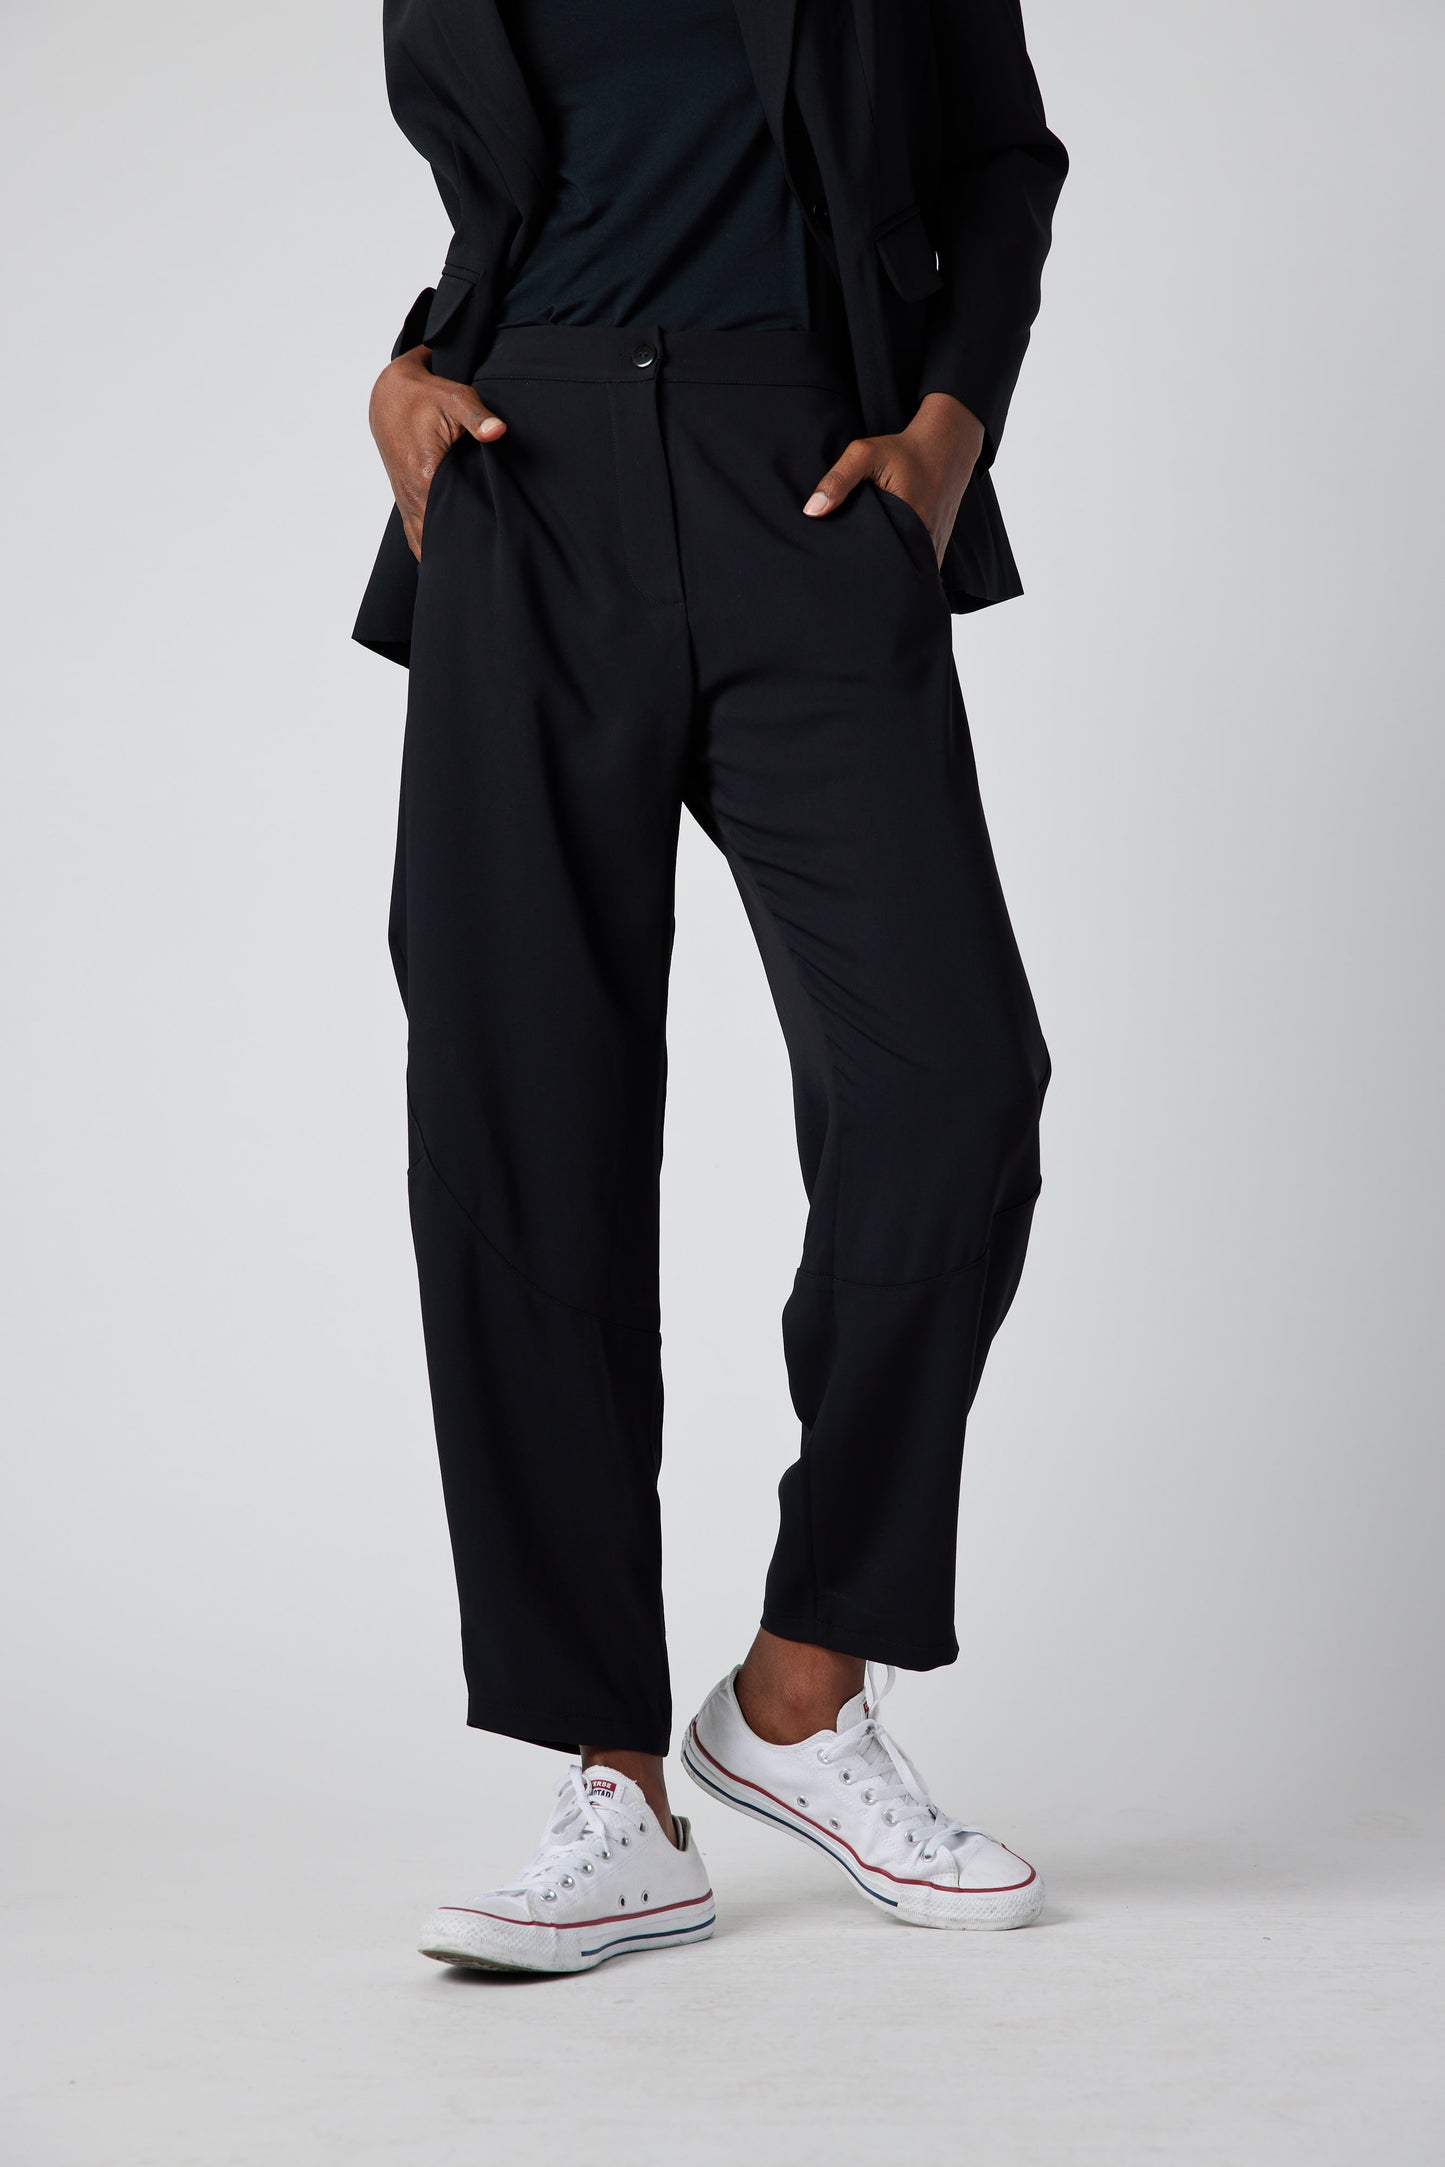 The Formal Wide-ish Pants